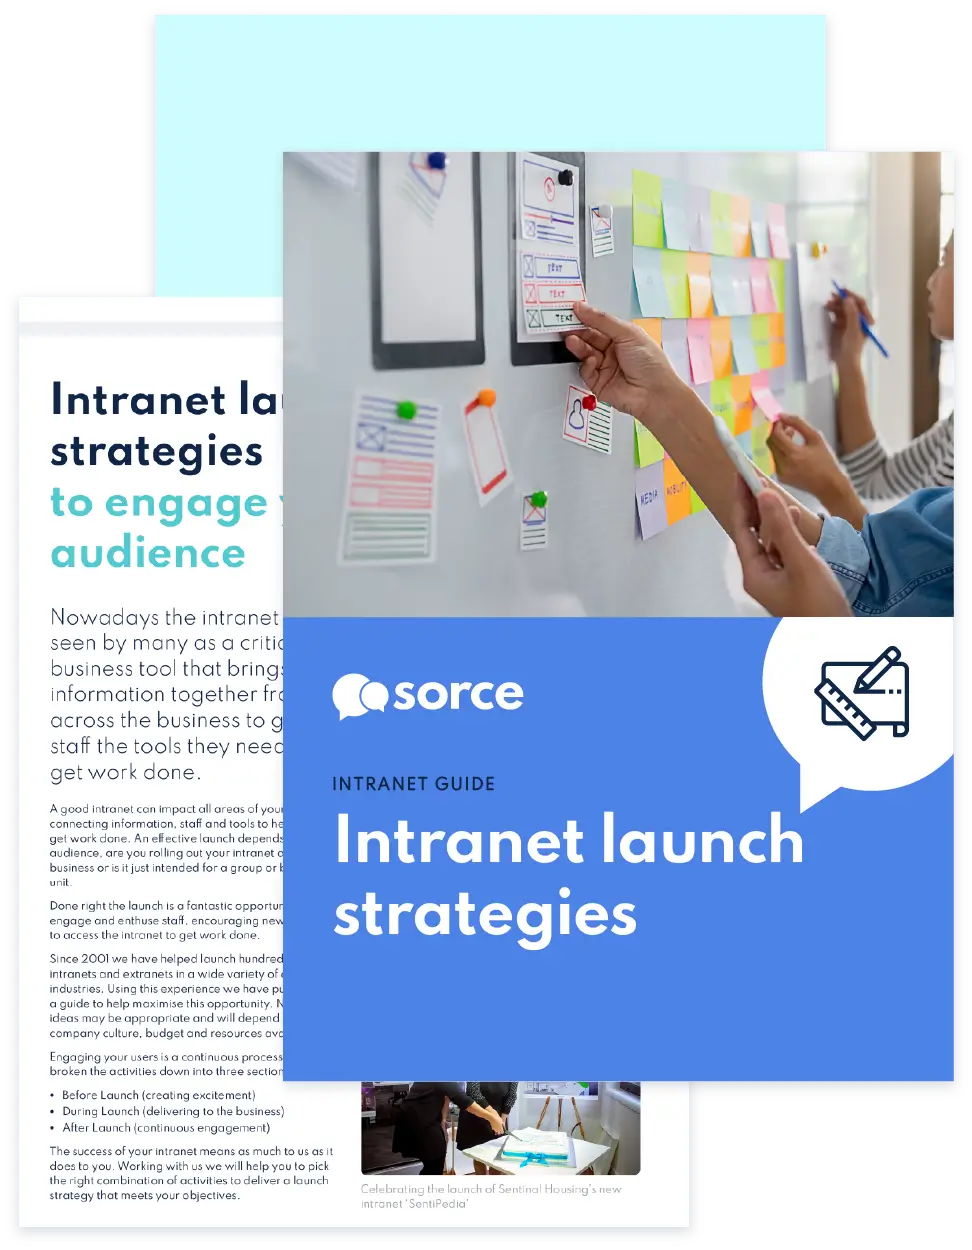 Intranet launch strategies guide